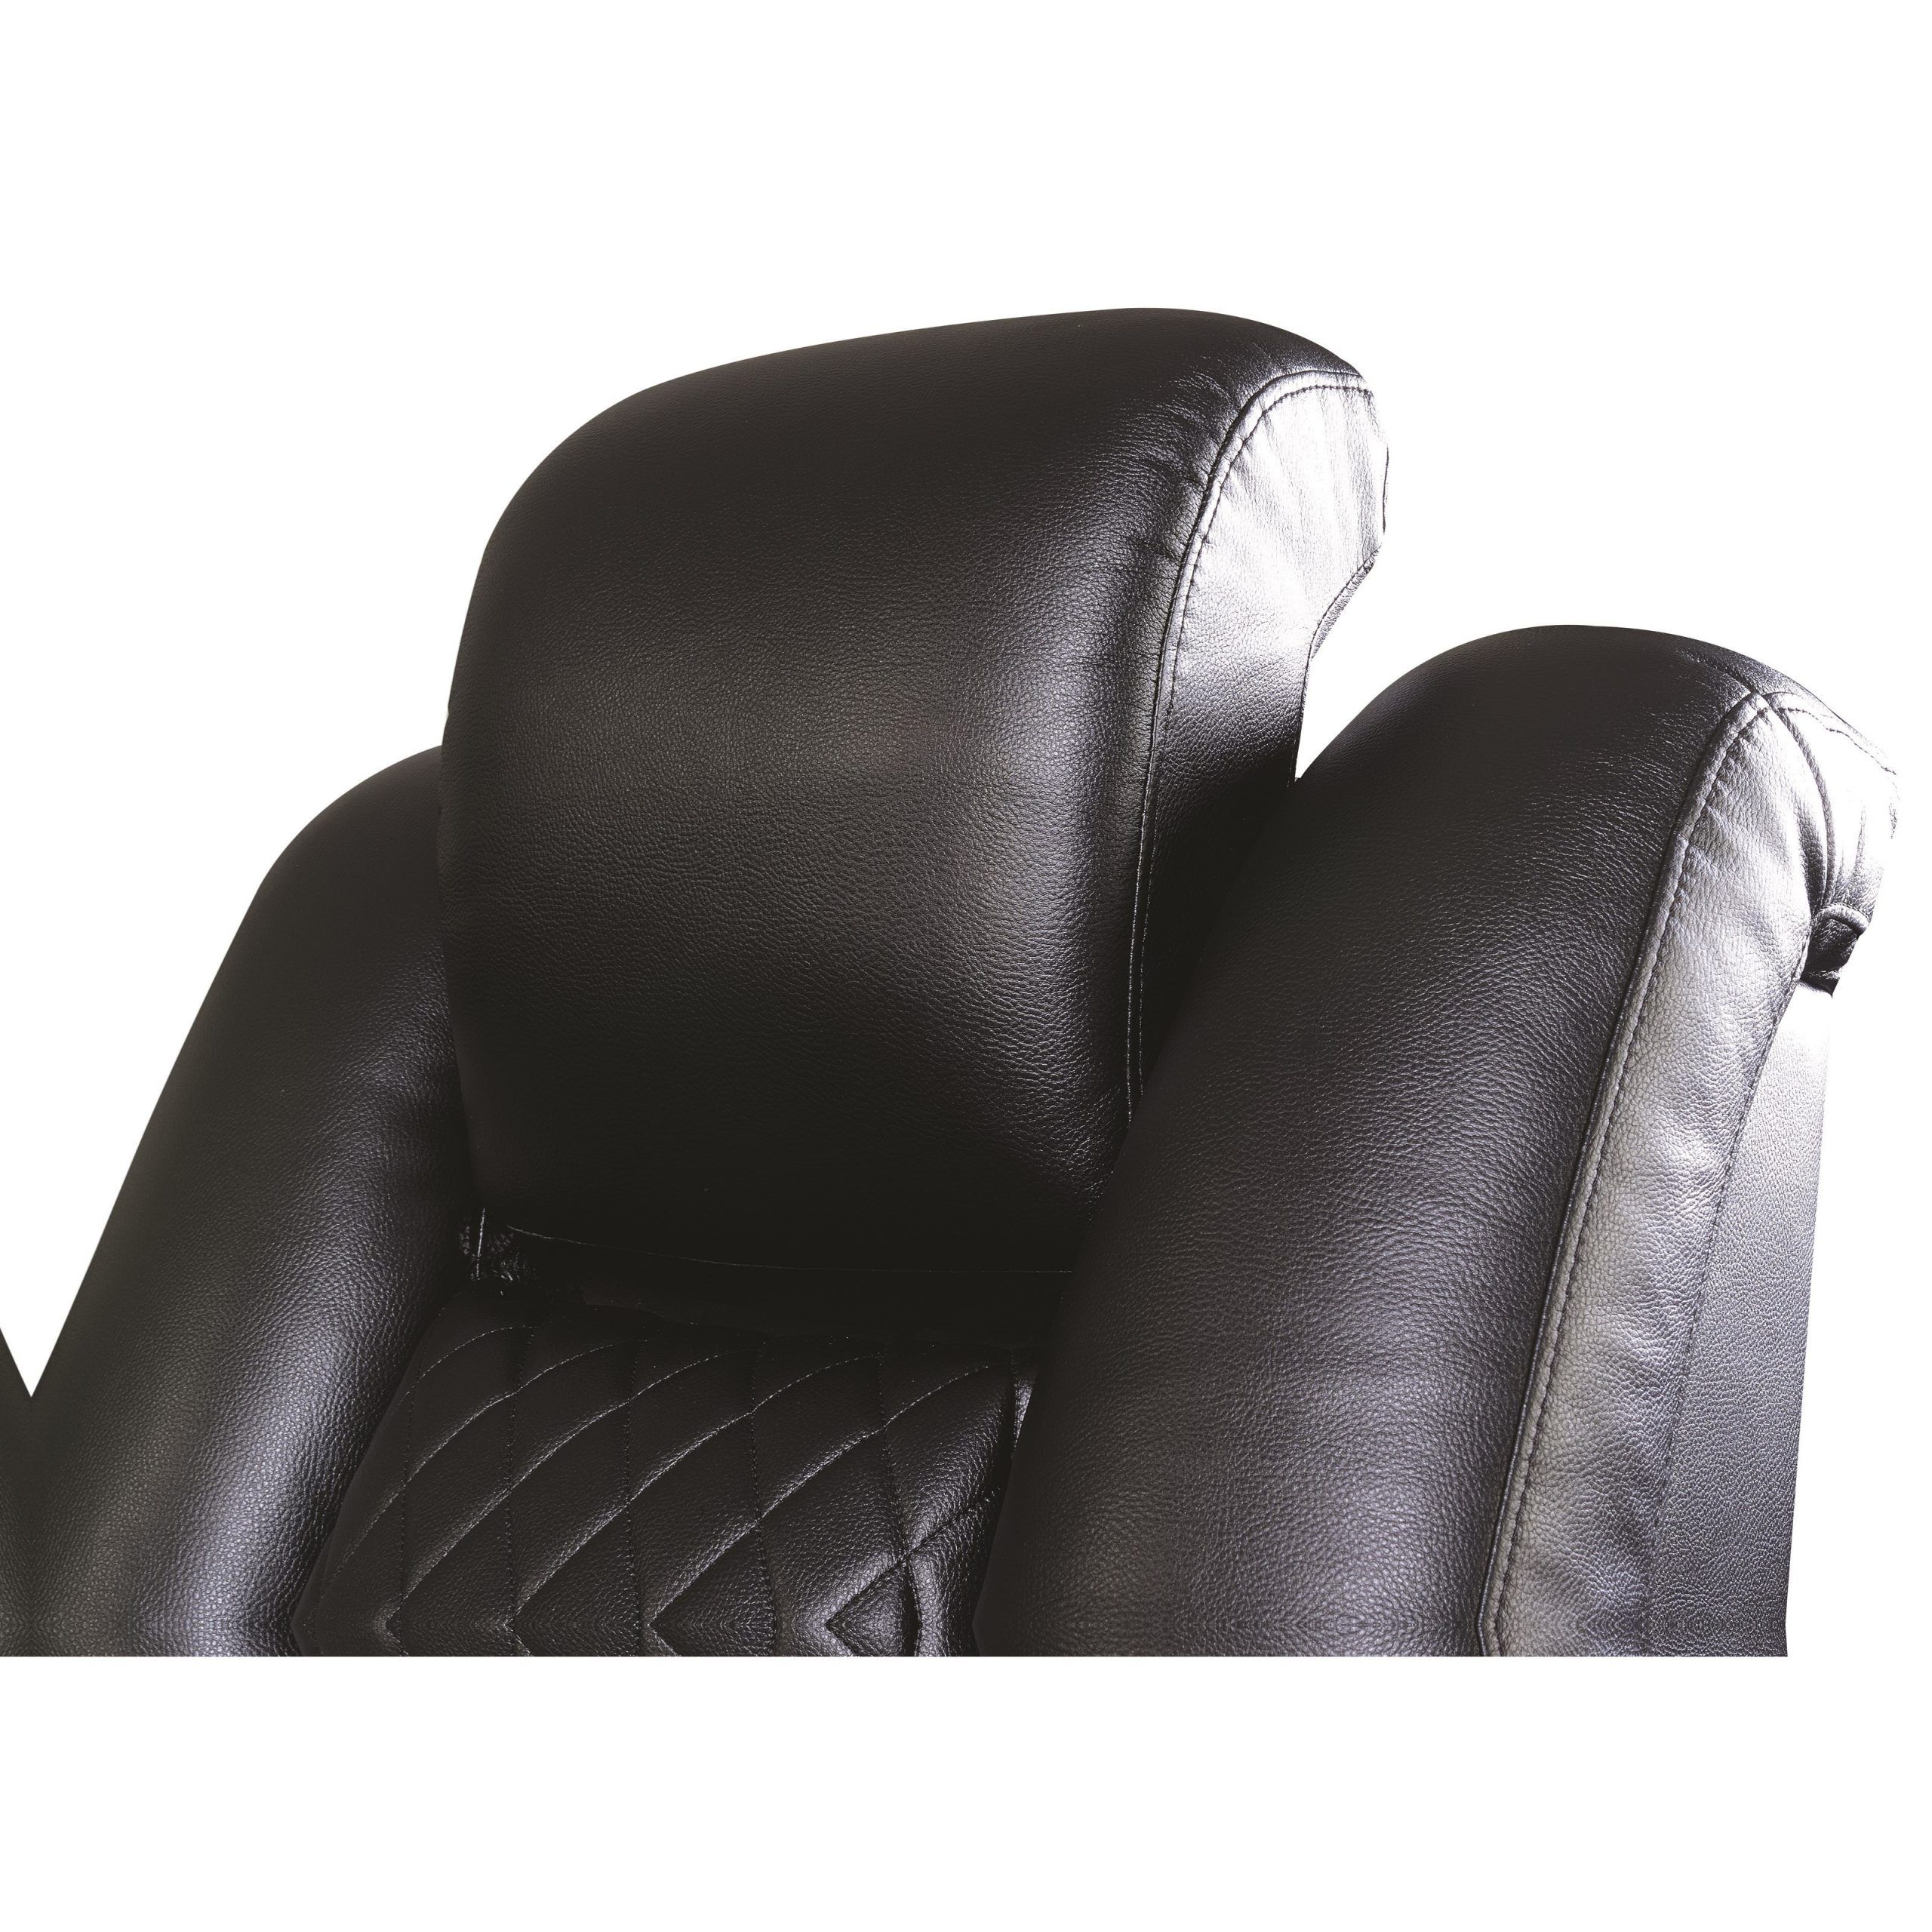 Espresso Faux Leather Ac And Usb Ottomans Intended For Best And Newest Delangelo Theater Power Leather Reclining Sofa With Cup Holders (View 8 of 10)